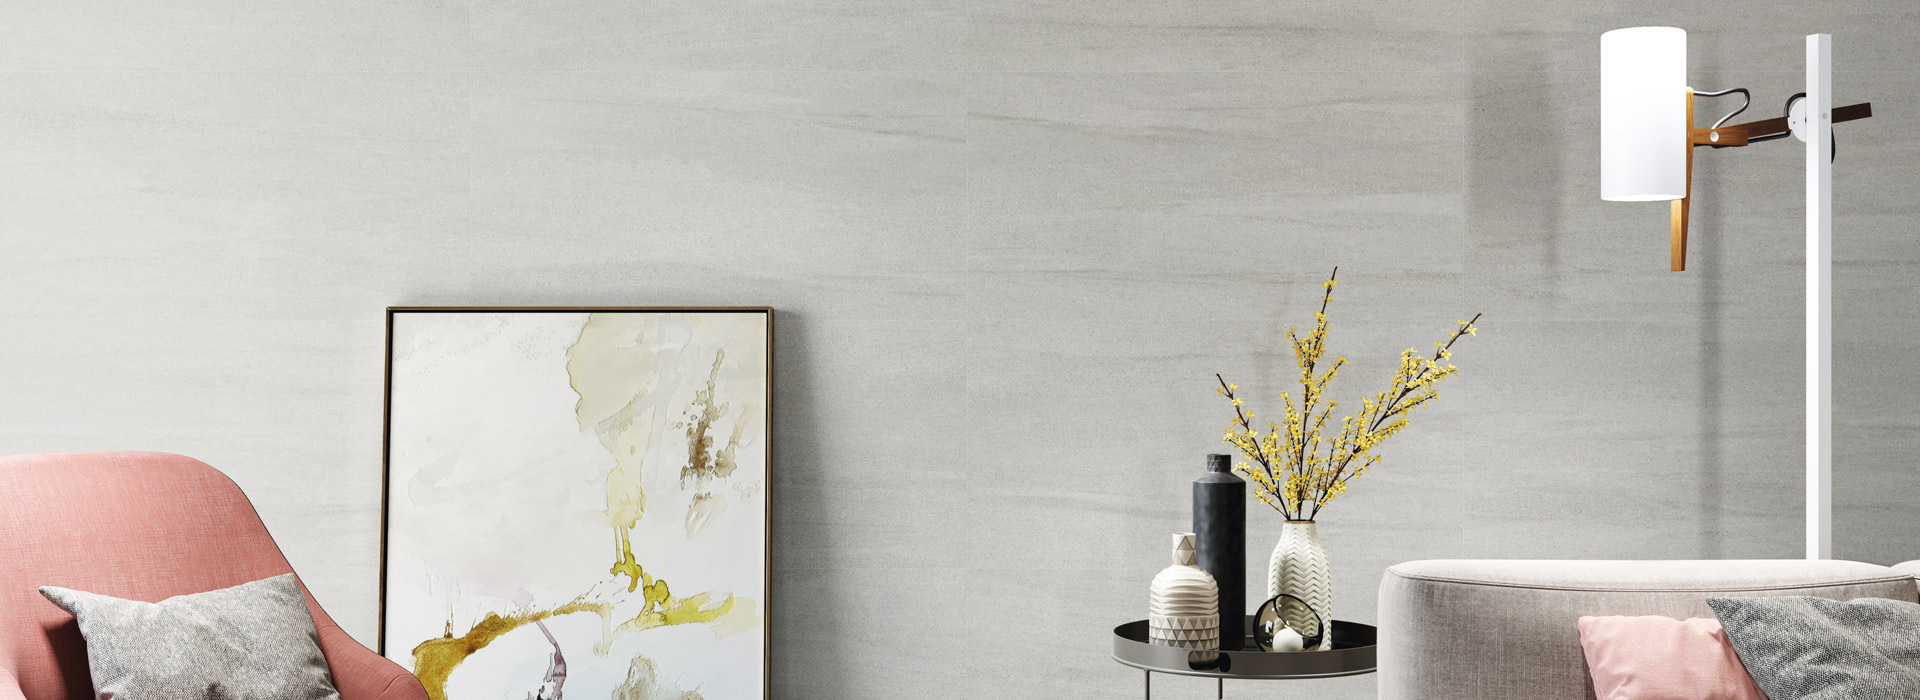 Timeless Elegance: Classic Wall Tile Designs That Never Go Out of Style 